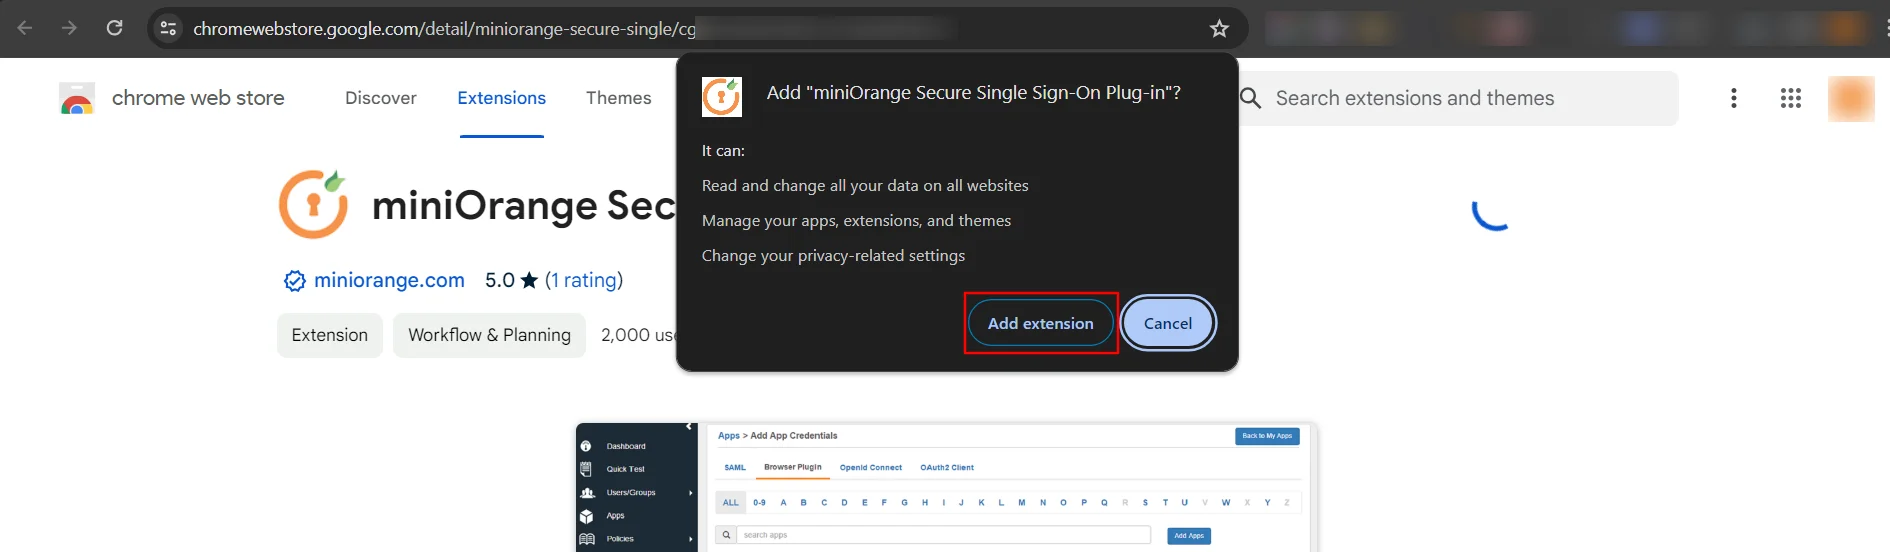 Mailchimp Single Sign-On (sso) extension added in chrome